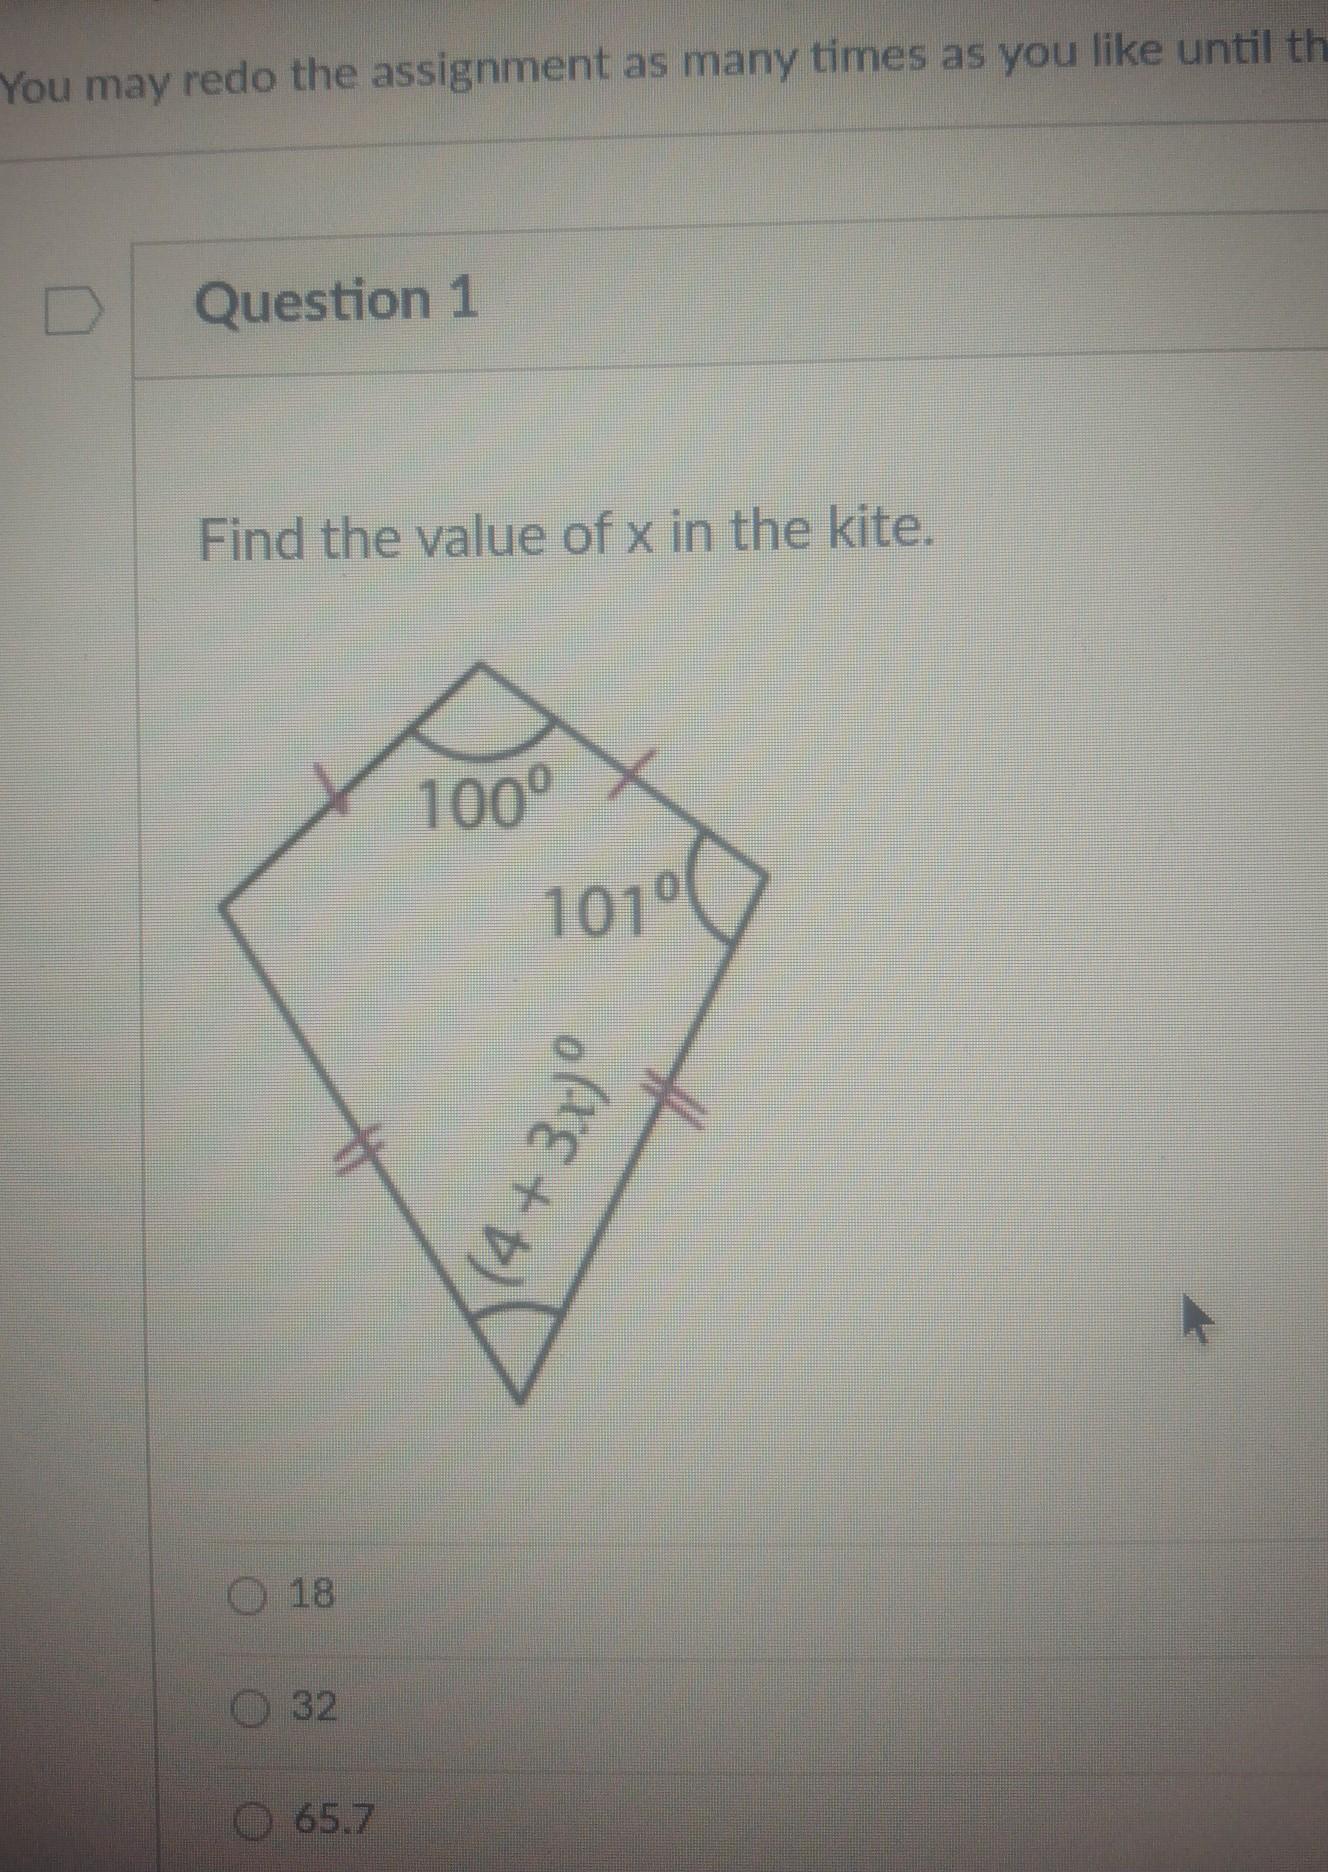 How Do I Solve This?